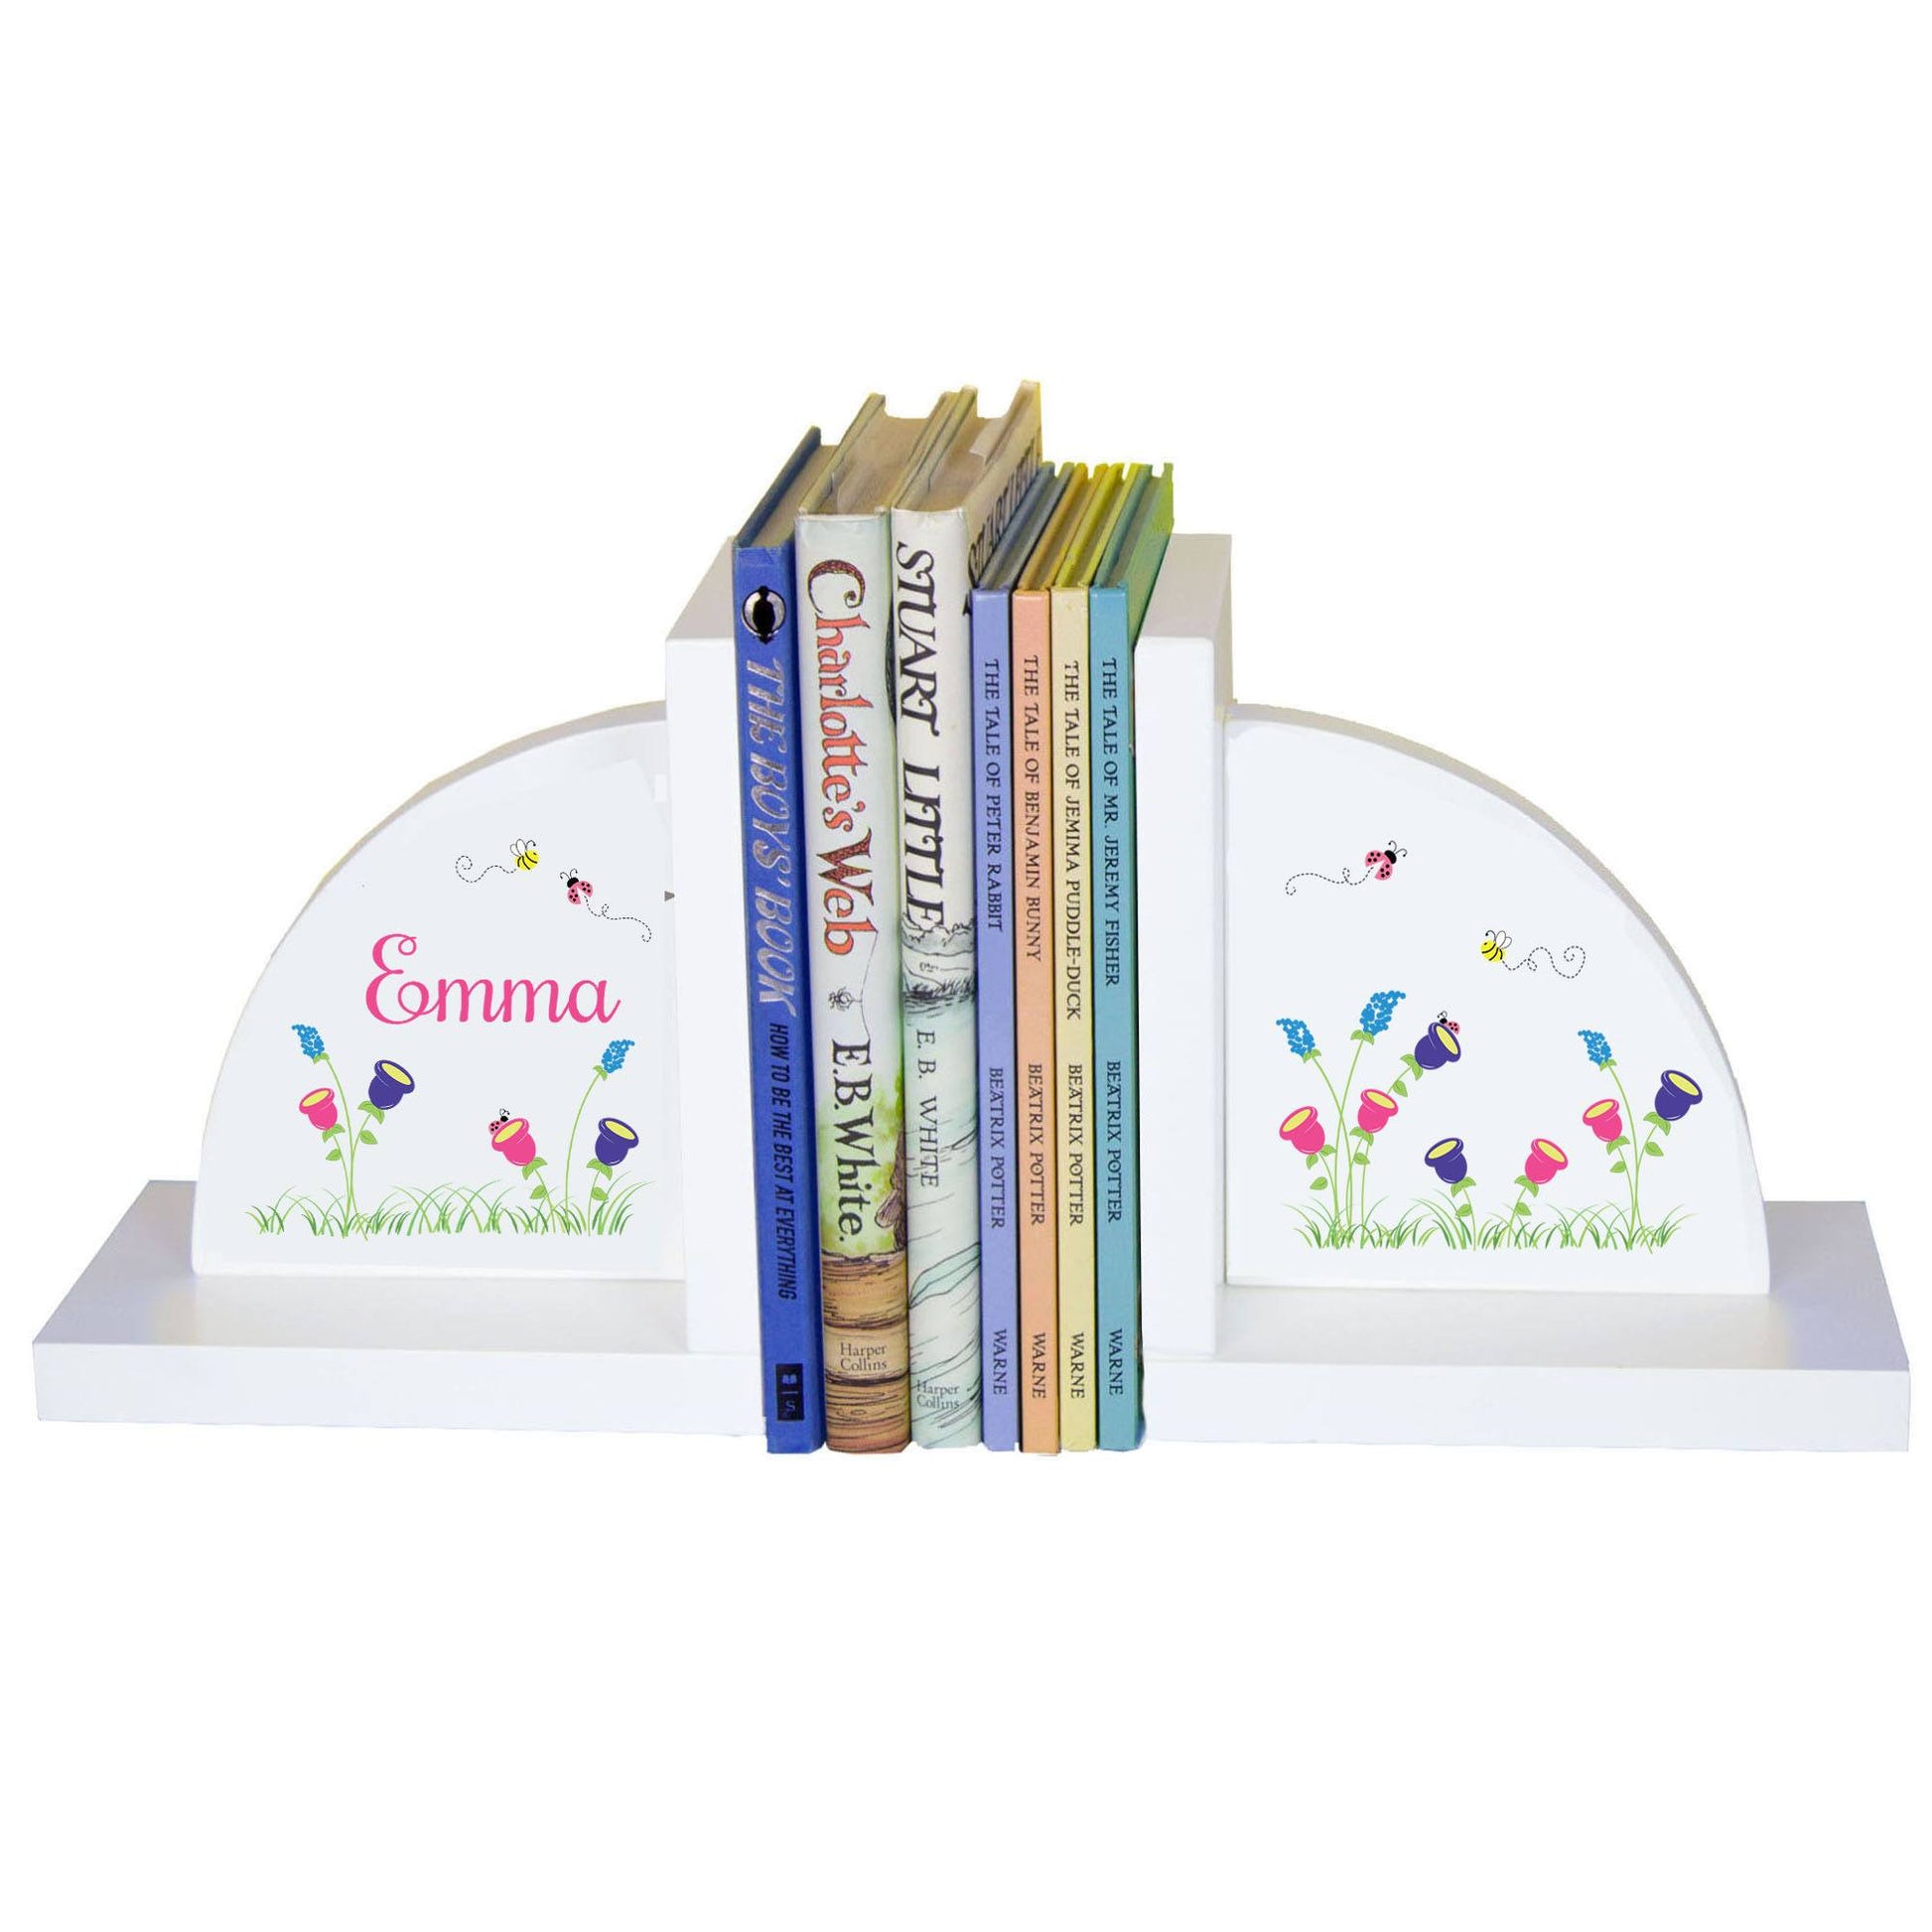 Personalized White Bookends with English Garden design